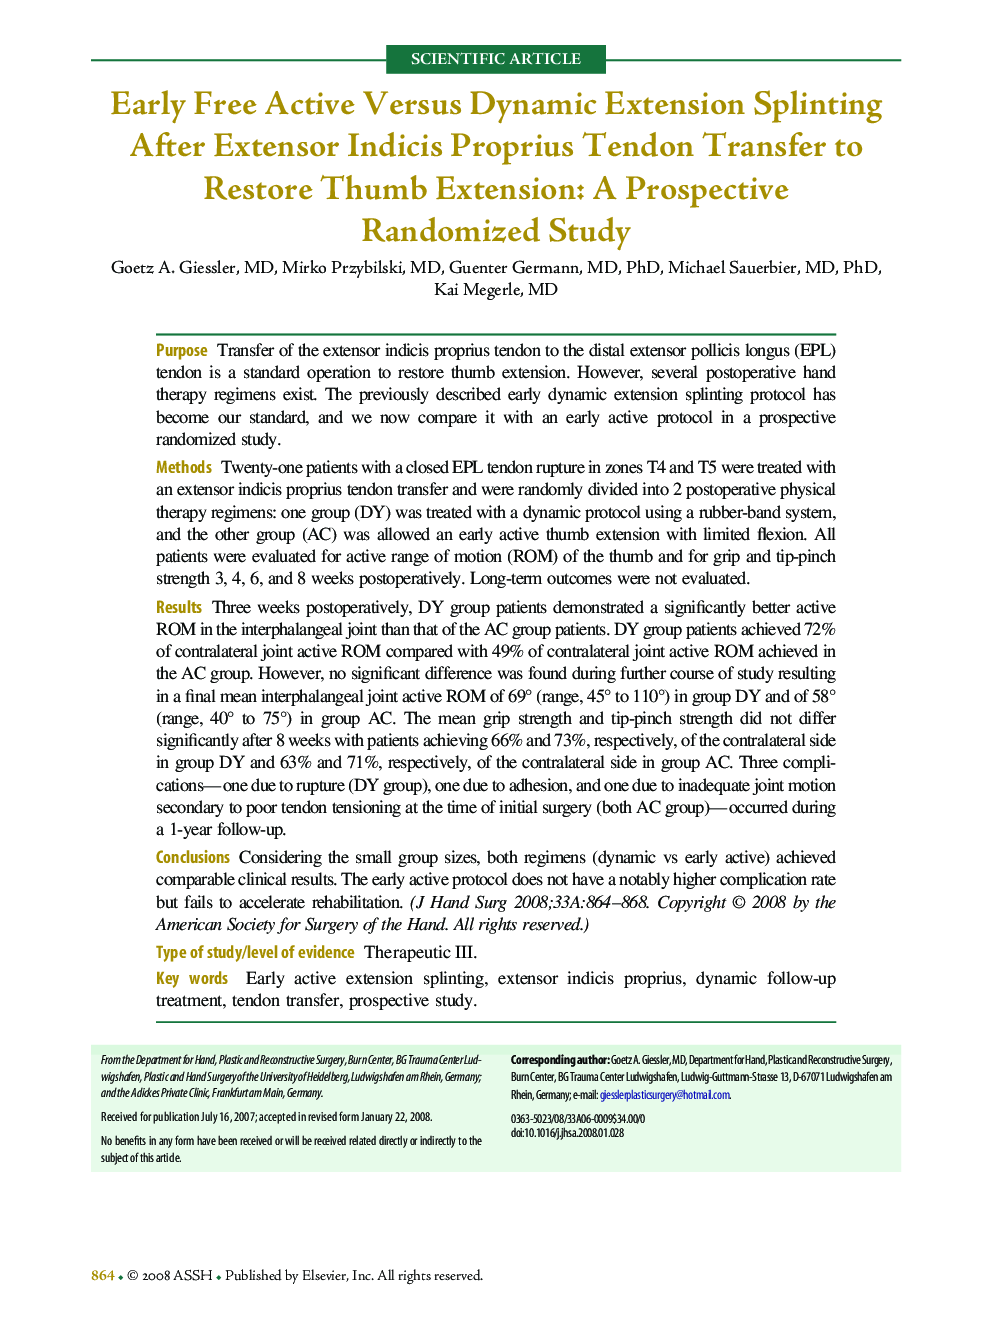 Early Free Active Versus Dynamic Extension Splinting After Extensor Indicis Proprius Tendon Transfer to Restore Thumb Extension: A Prospective Randomized Study 